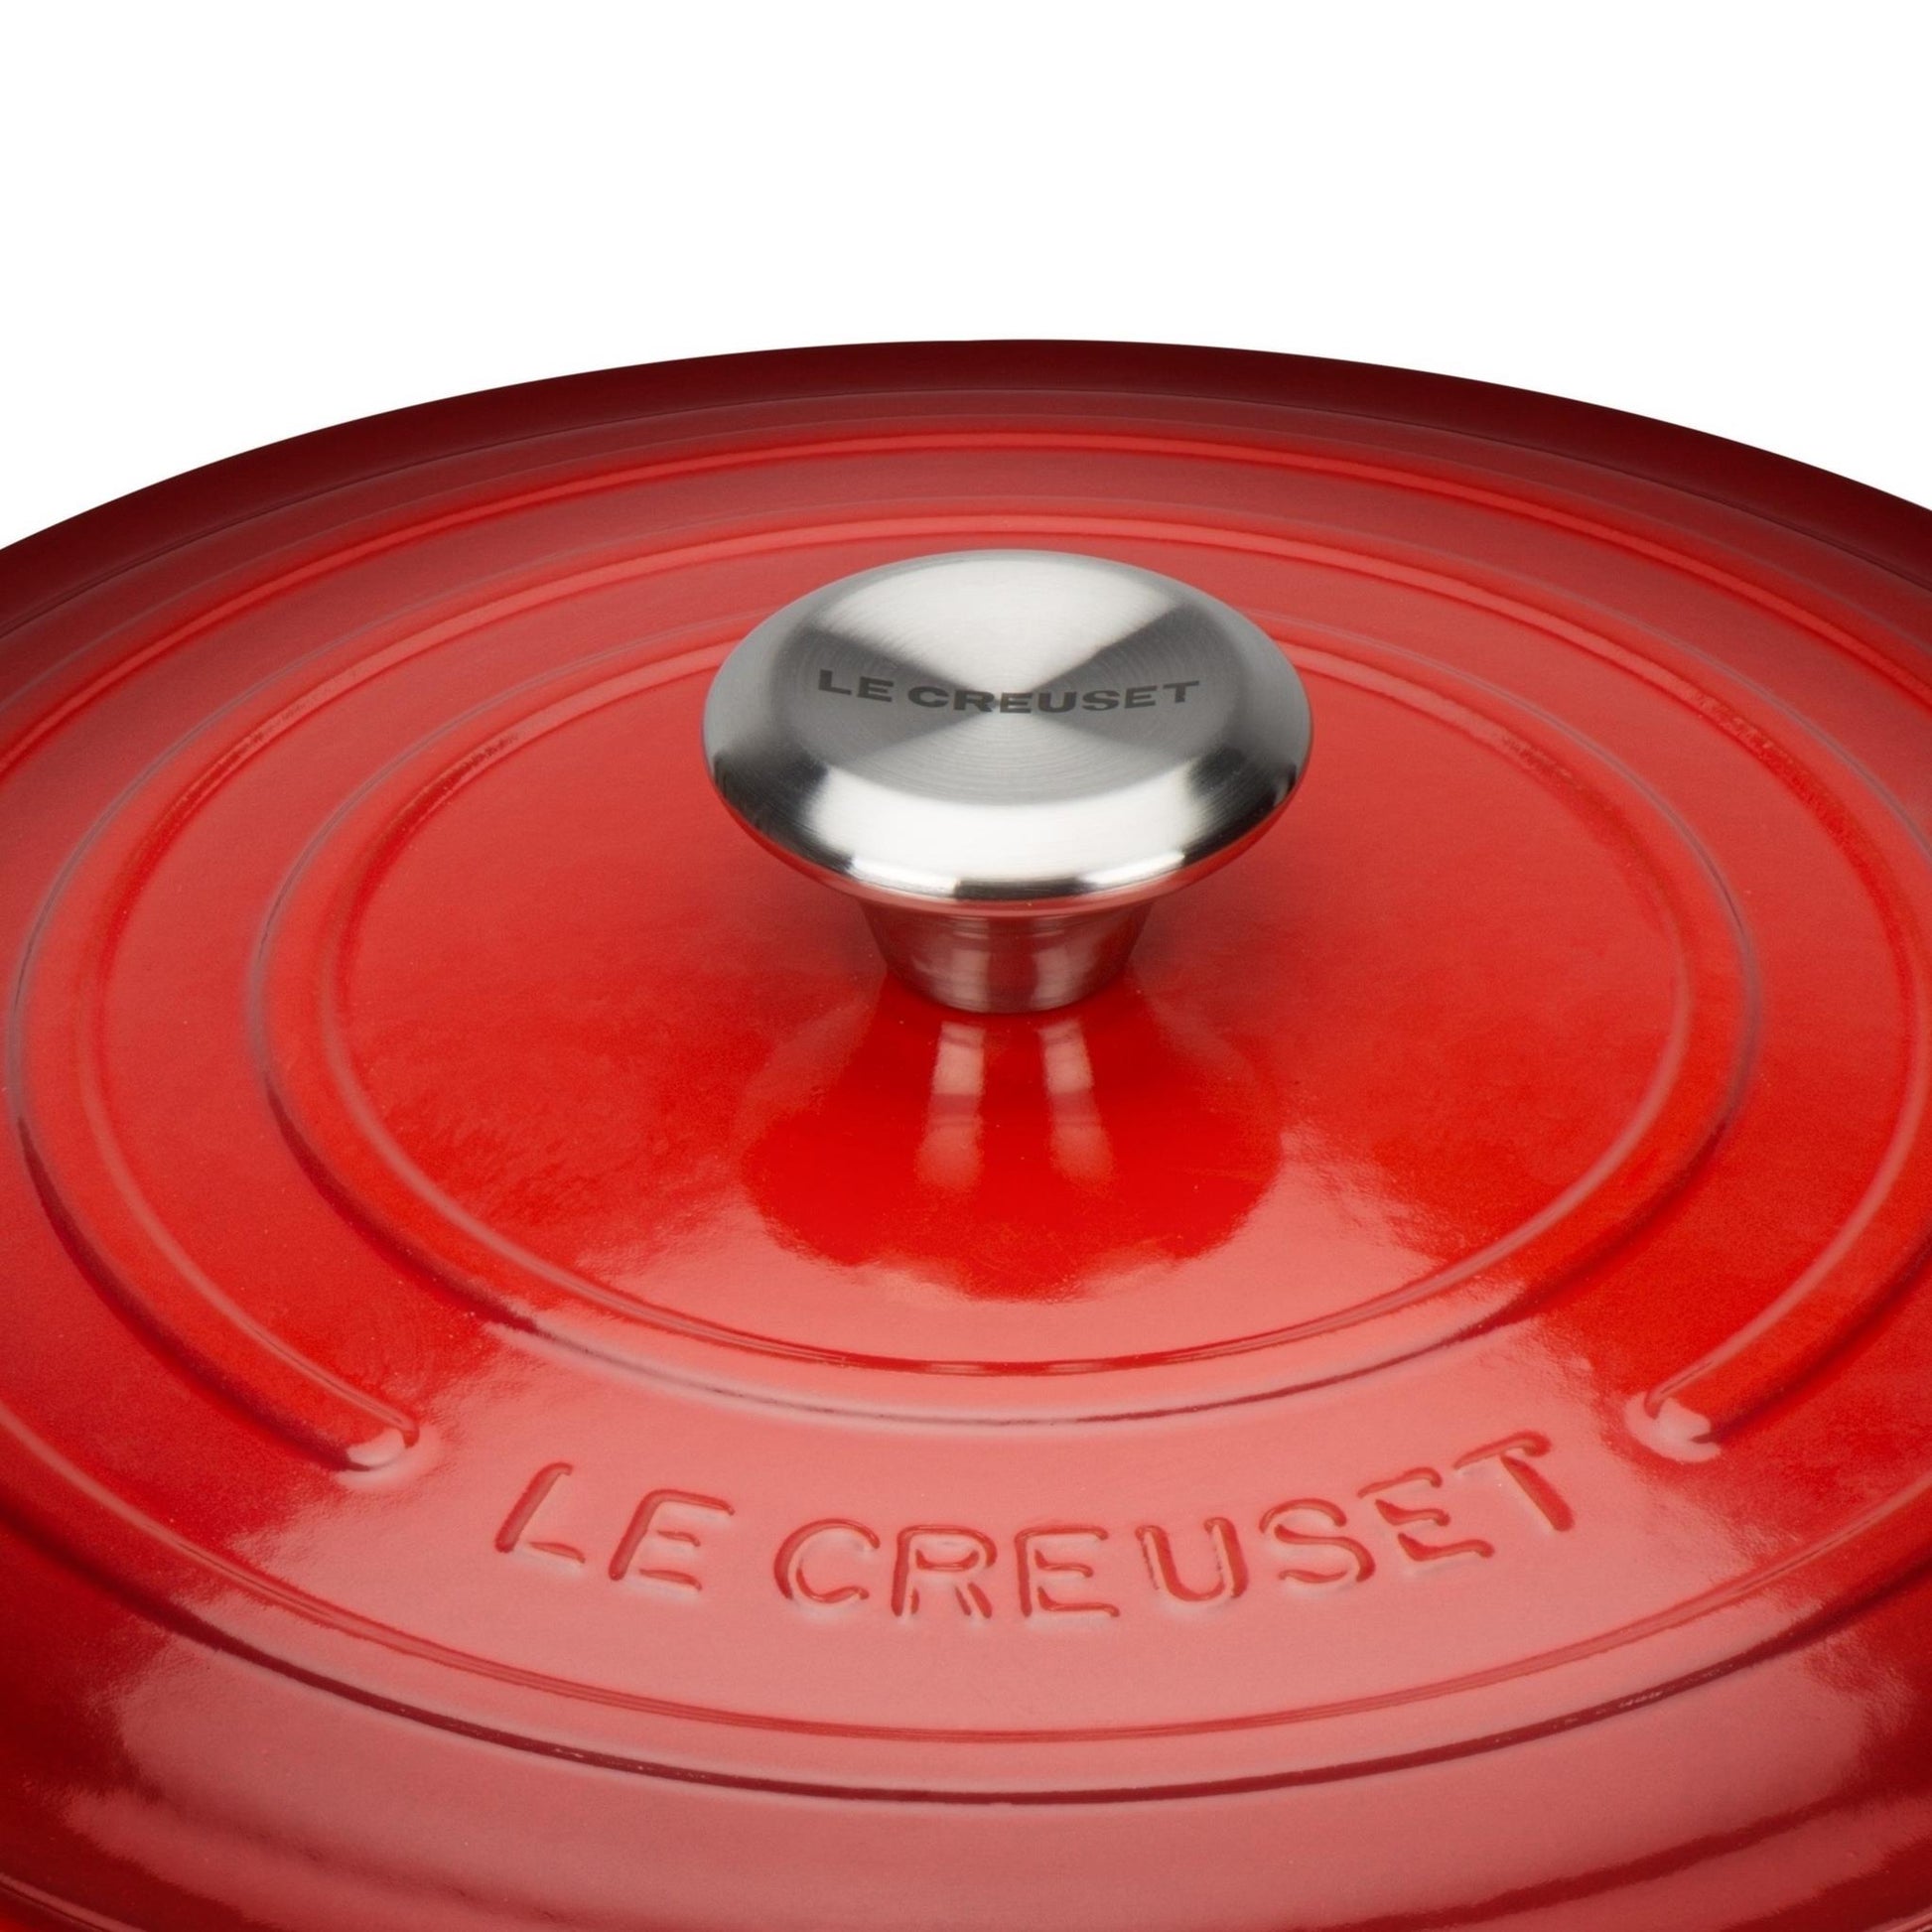 A close up of the pot lid with the le crueset logo embossed and the branded pot handle